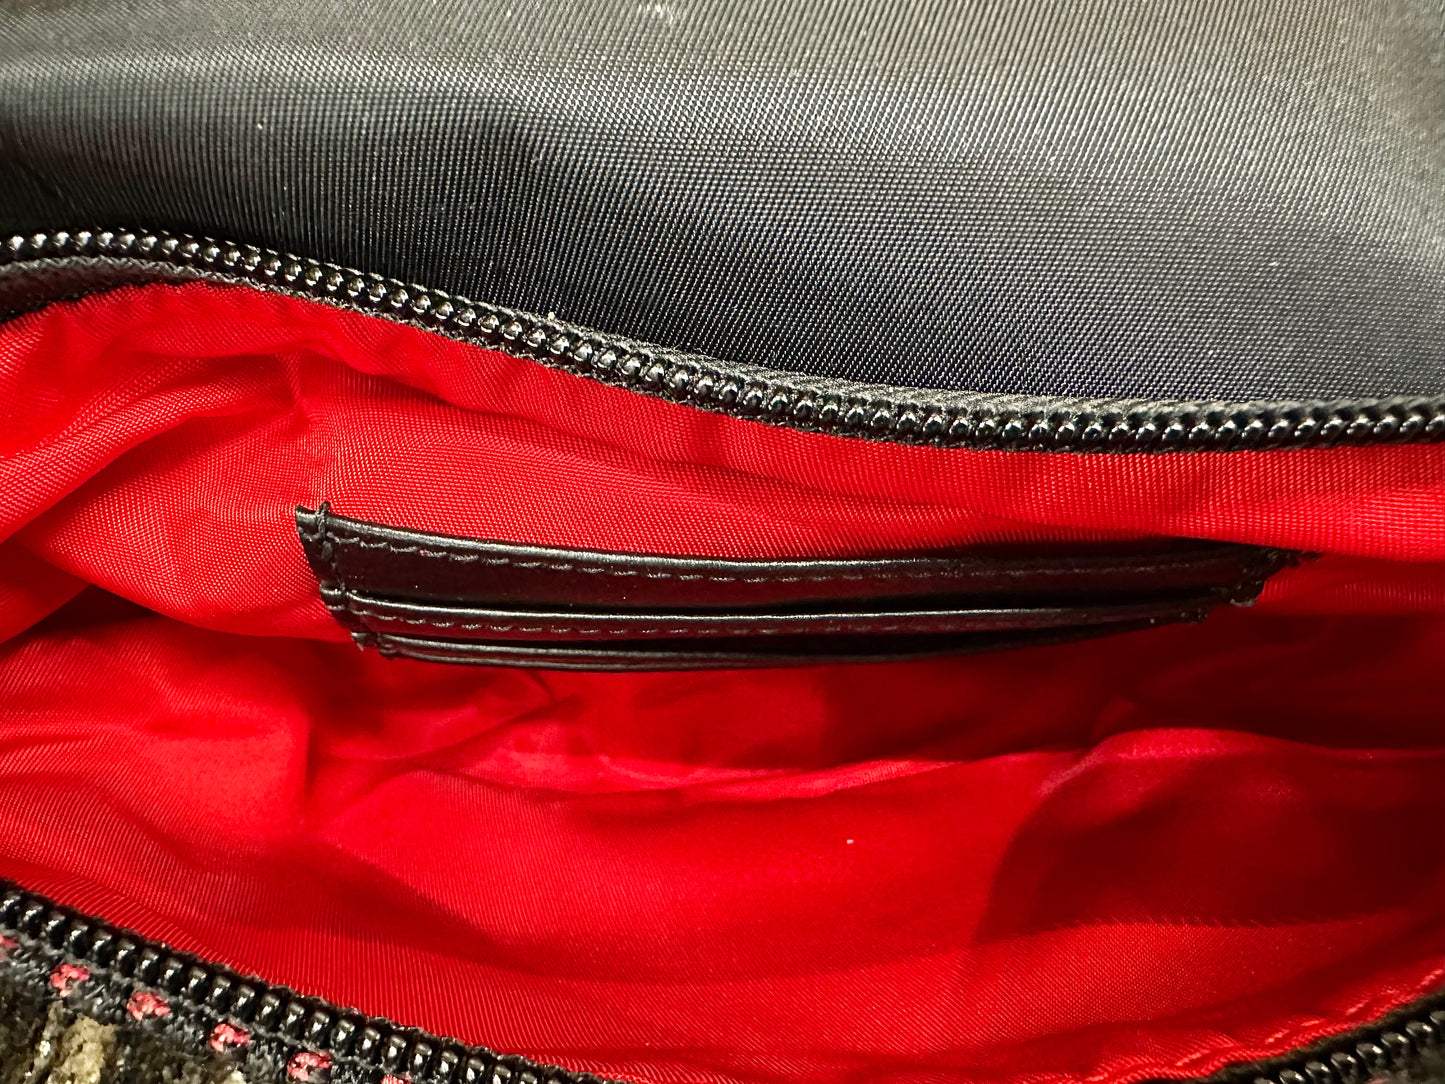 Red interior of pocket with black card slots